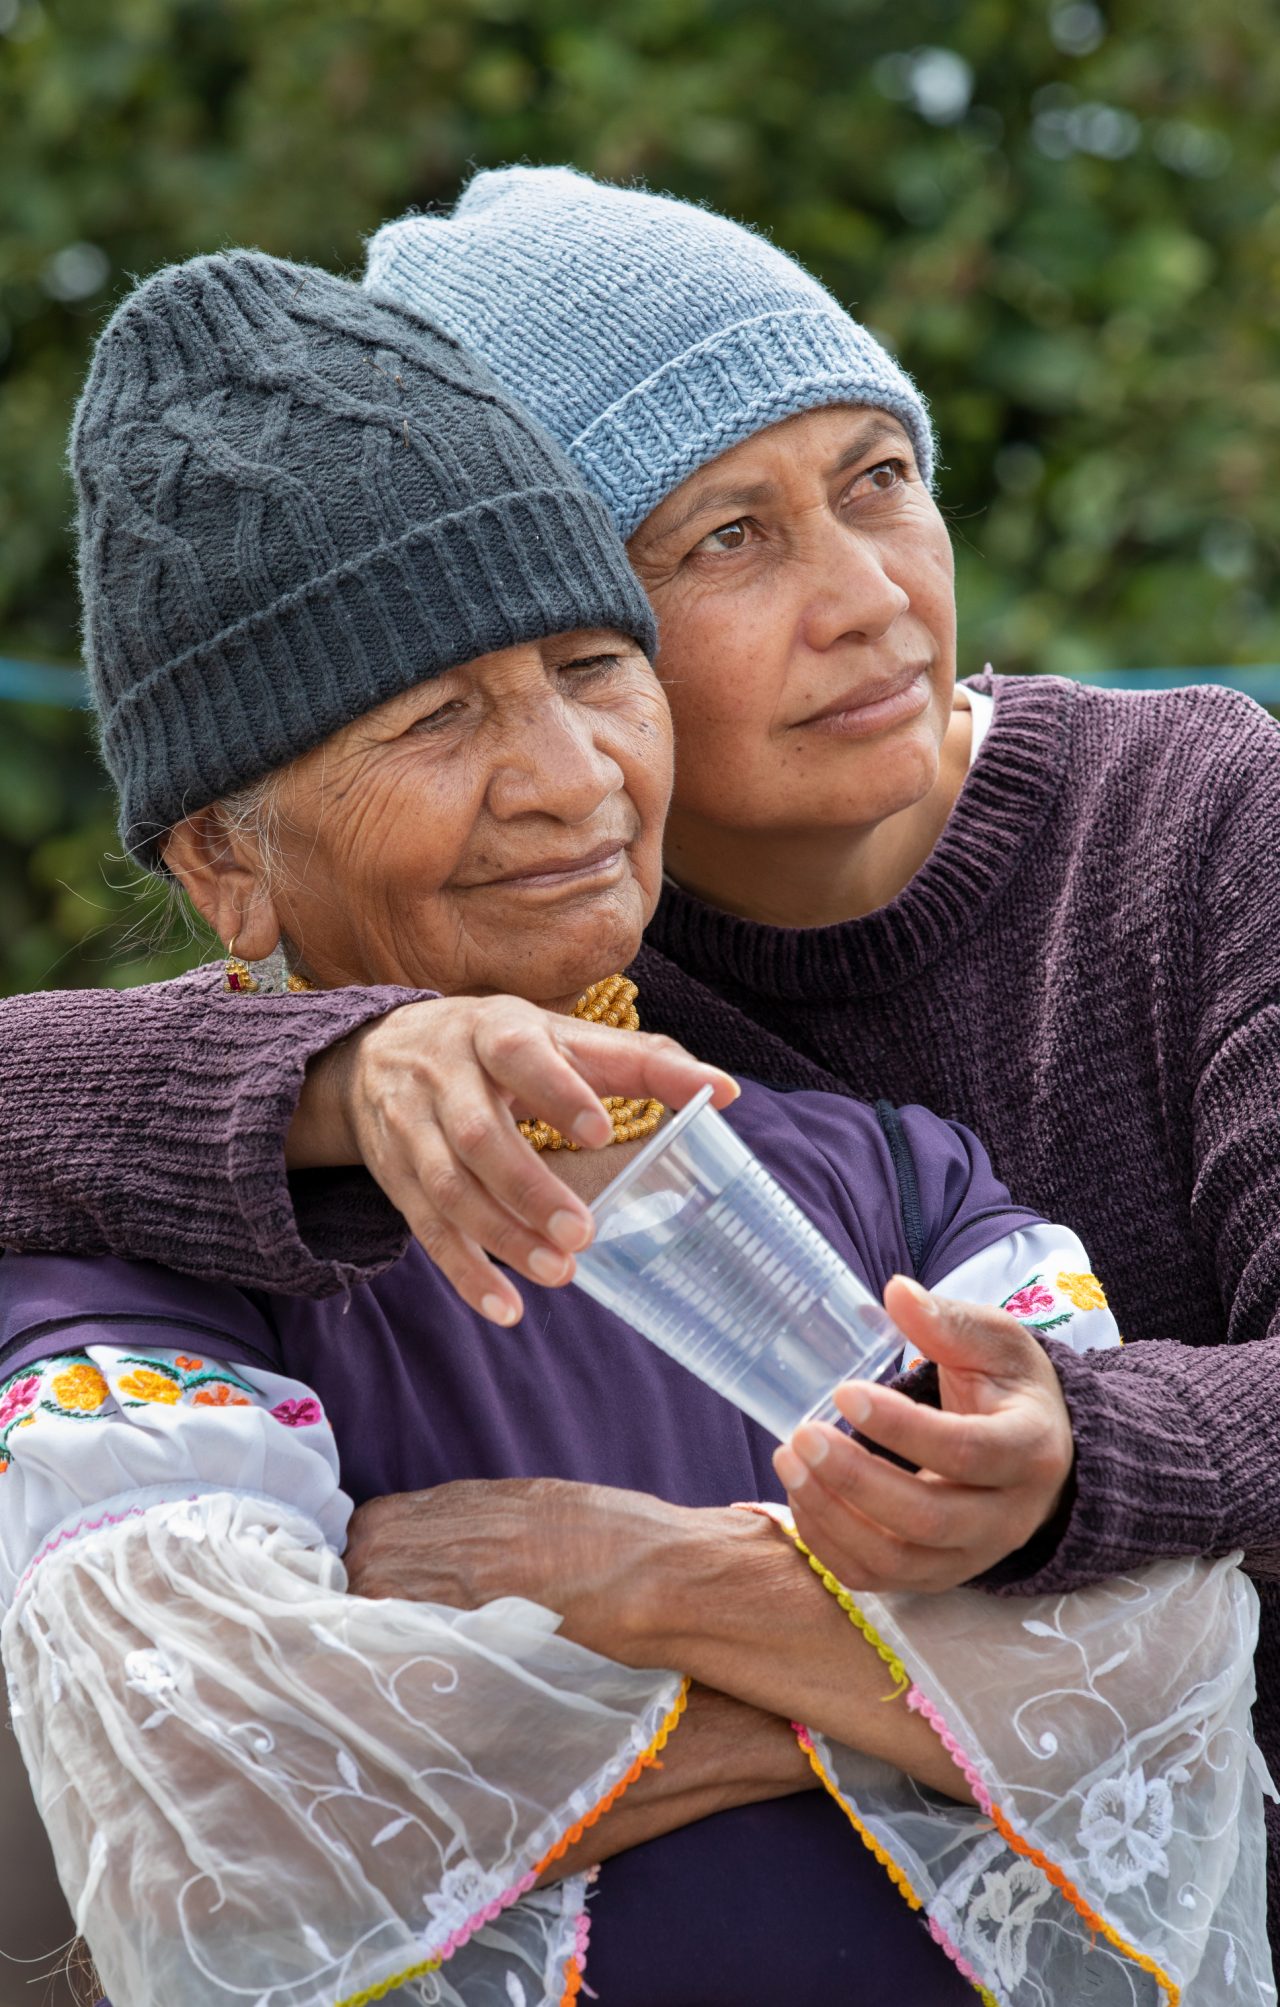 Nancy Vinueza (right) and her 82-year-old mother, Maria, listen to Desmond communicate the gospel.